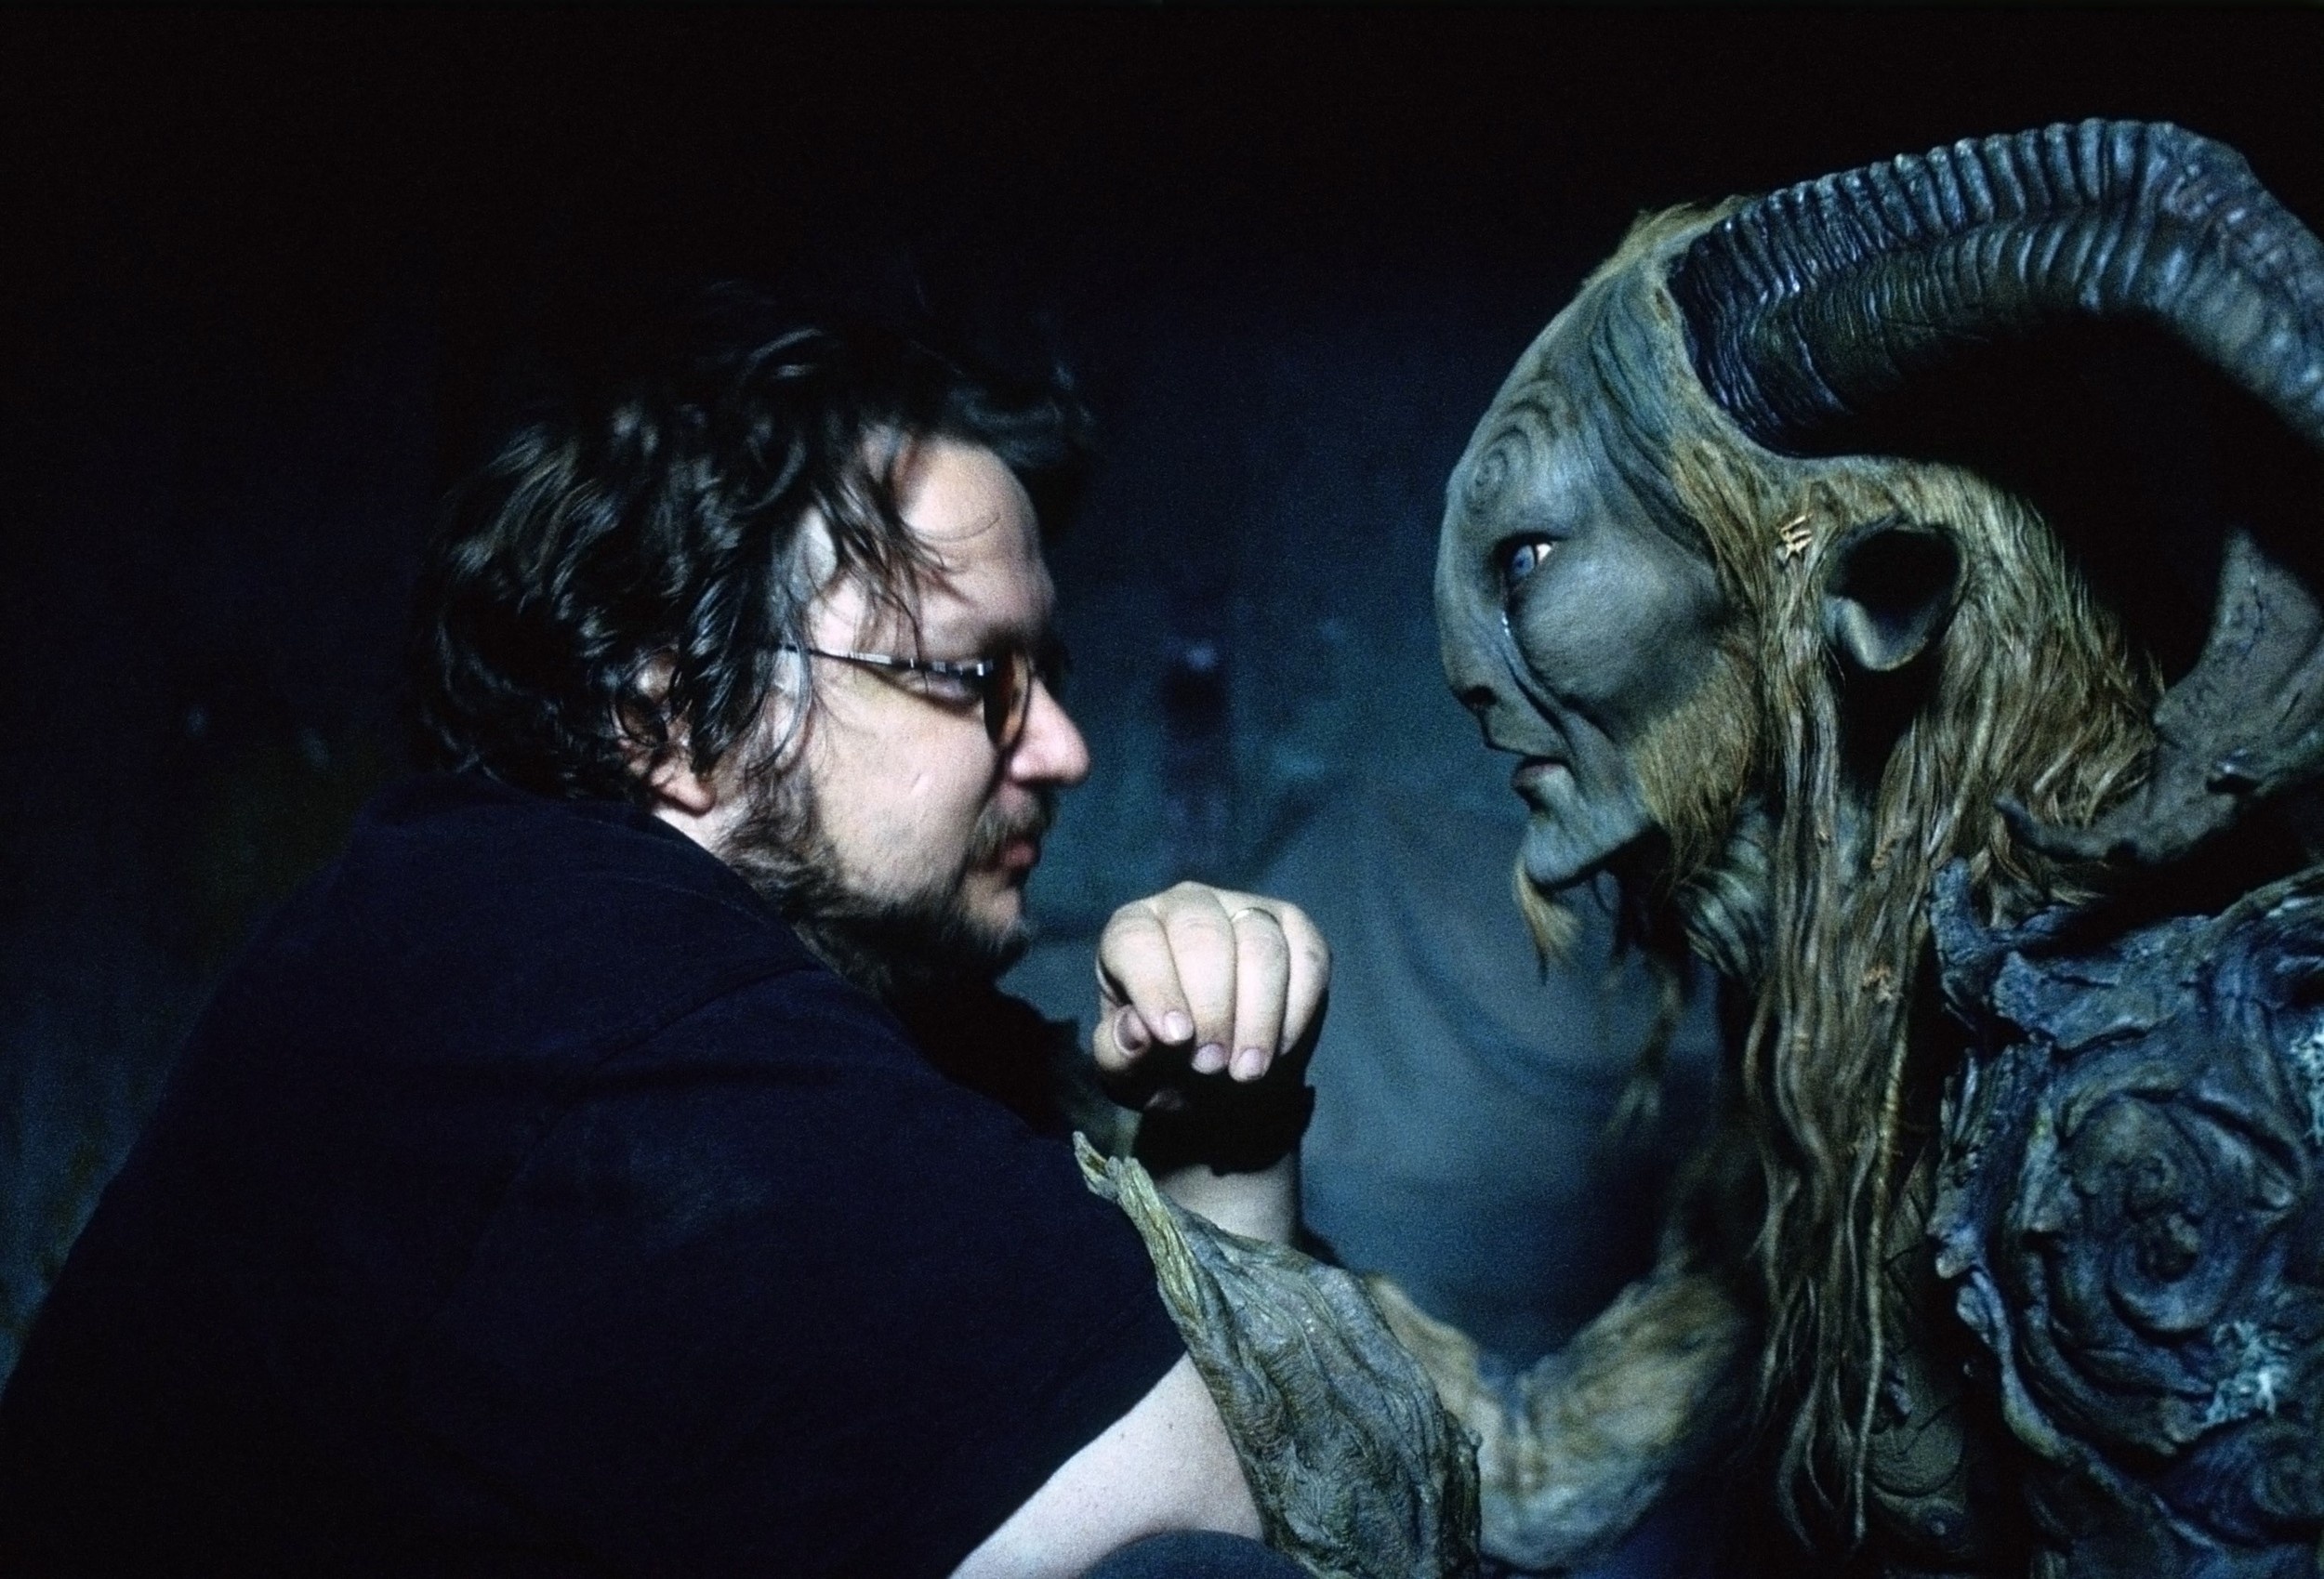 <p>With <span><em>Pan’s Labyrinth</em>, </span>Guillermo del Toro showed once again that he has an imagination that is more creative and often more disturbing than almost any other working director. Focusing on a young girl named Ofelia as she encounters the titular being and several other magical creatures, it’s a hauntingly beautiful film at a narrative and visual level. As with so many of the director’s other works, it manages to be both realistic and fantastical. Moreover, it's a moving exploration of the powers of war and fascism to destroy the innocence of the young. </p><p>You may also like: <a href='https://www.yardbarker.com/entertainment/articles/the_50_greatest_rolling_stones_songs_012524/s1__33027350'>The 50 greatest Rolling Stones songs</a></p>